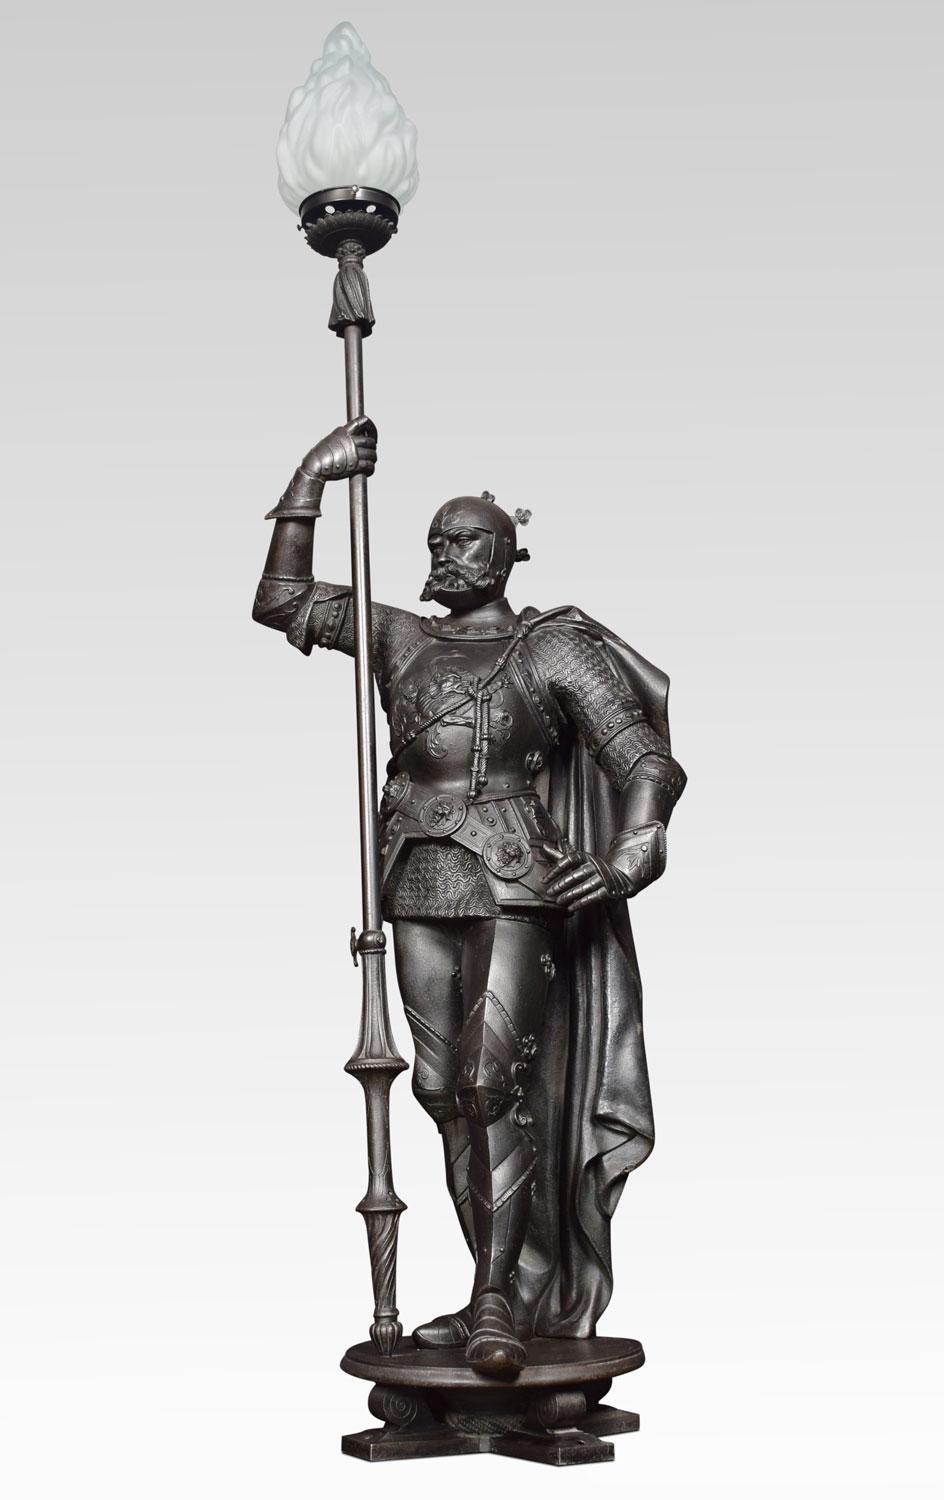 Very large pair of 19th century cast iron figures of knights having his armoured breastplate and robe, one hand clenching a flaming torch.(the lamps have been converted to electricity and wired.)
Dimensions
Height 61 inches
Width 18 inches
Depth